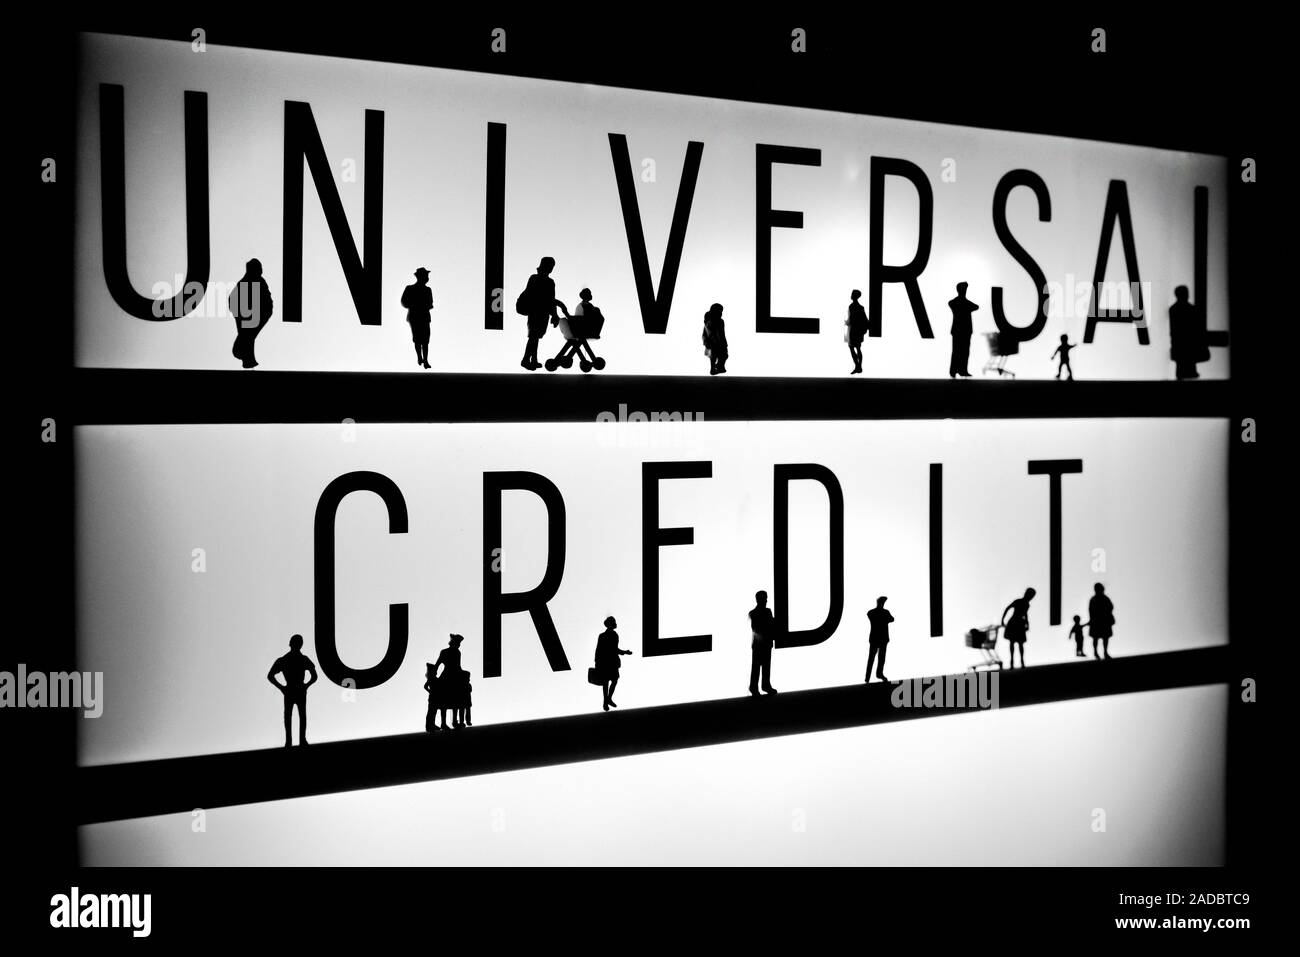 Miniature figurines standing in front of the words universal credit concept Stock Photo